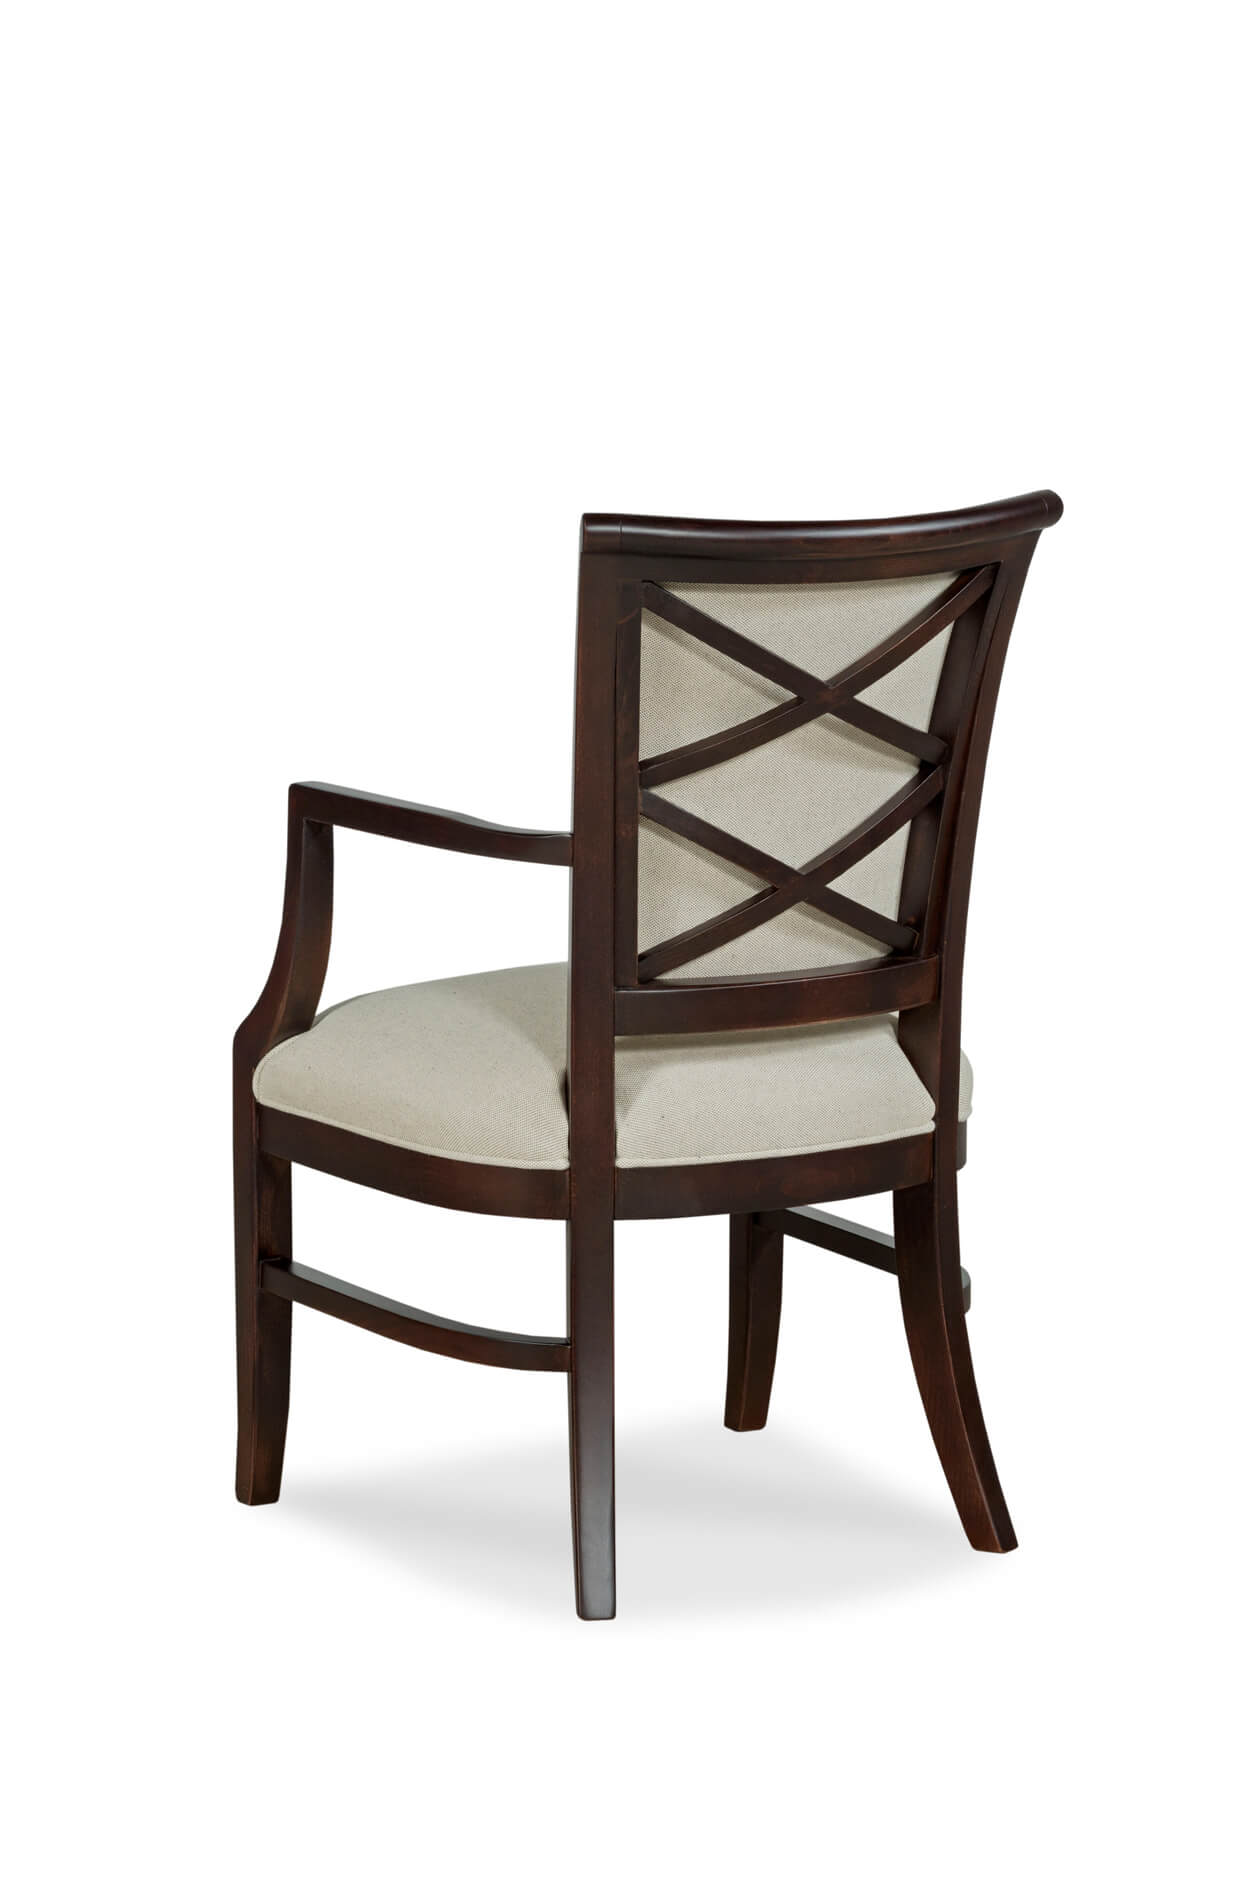 Buy Fairfield's Mackay Upholstered Dining Arm Chair - Free Shipping!